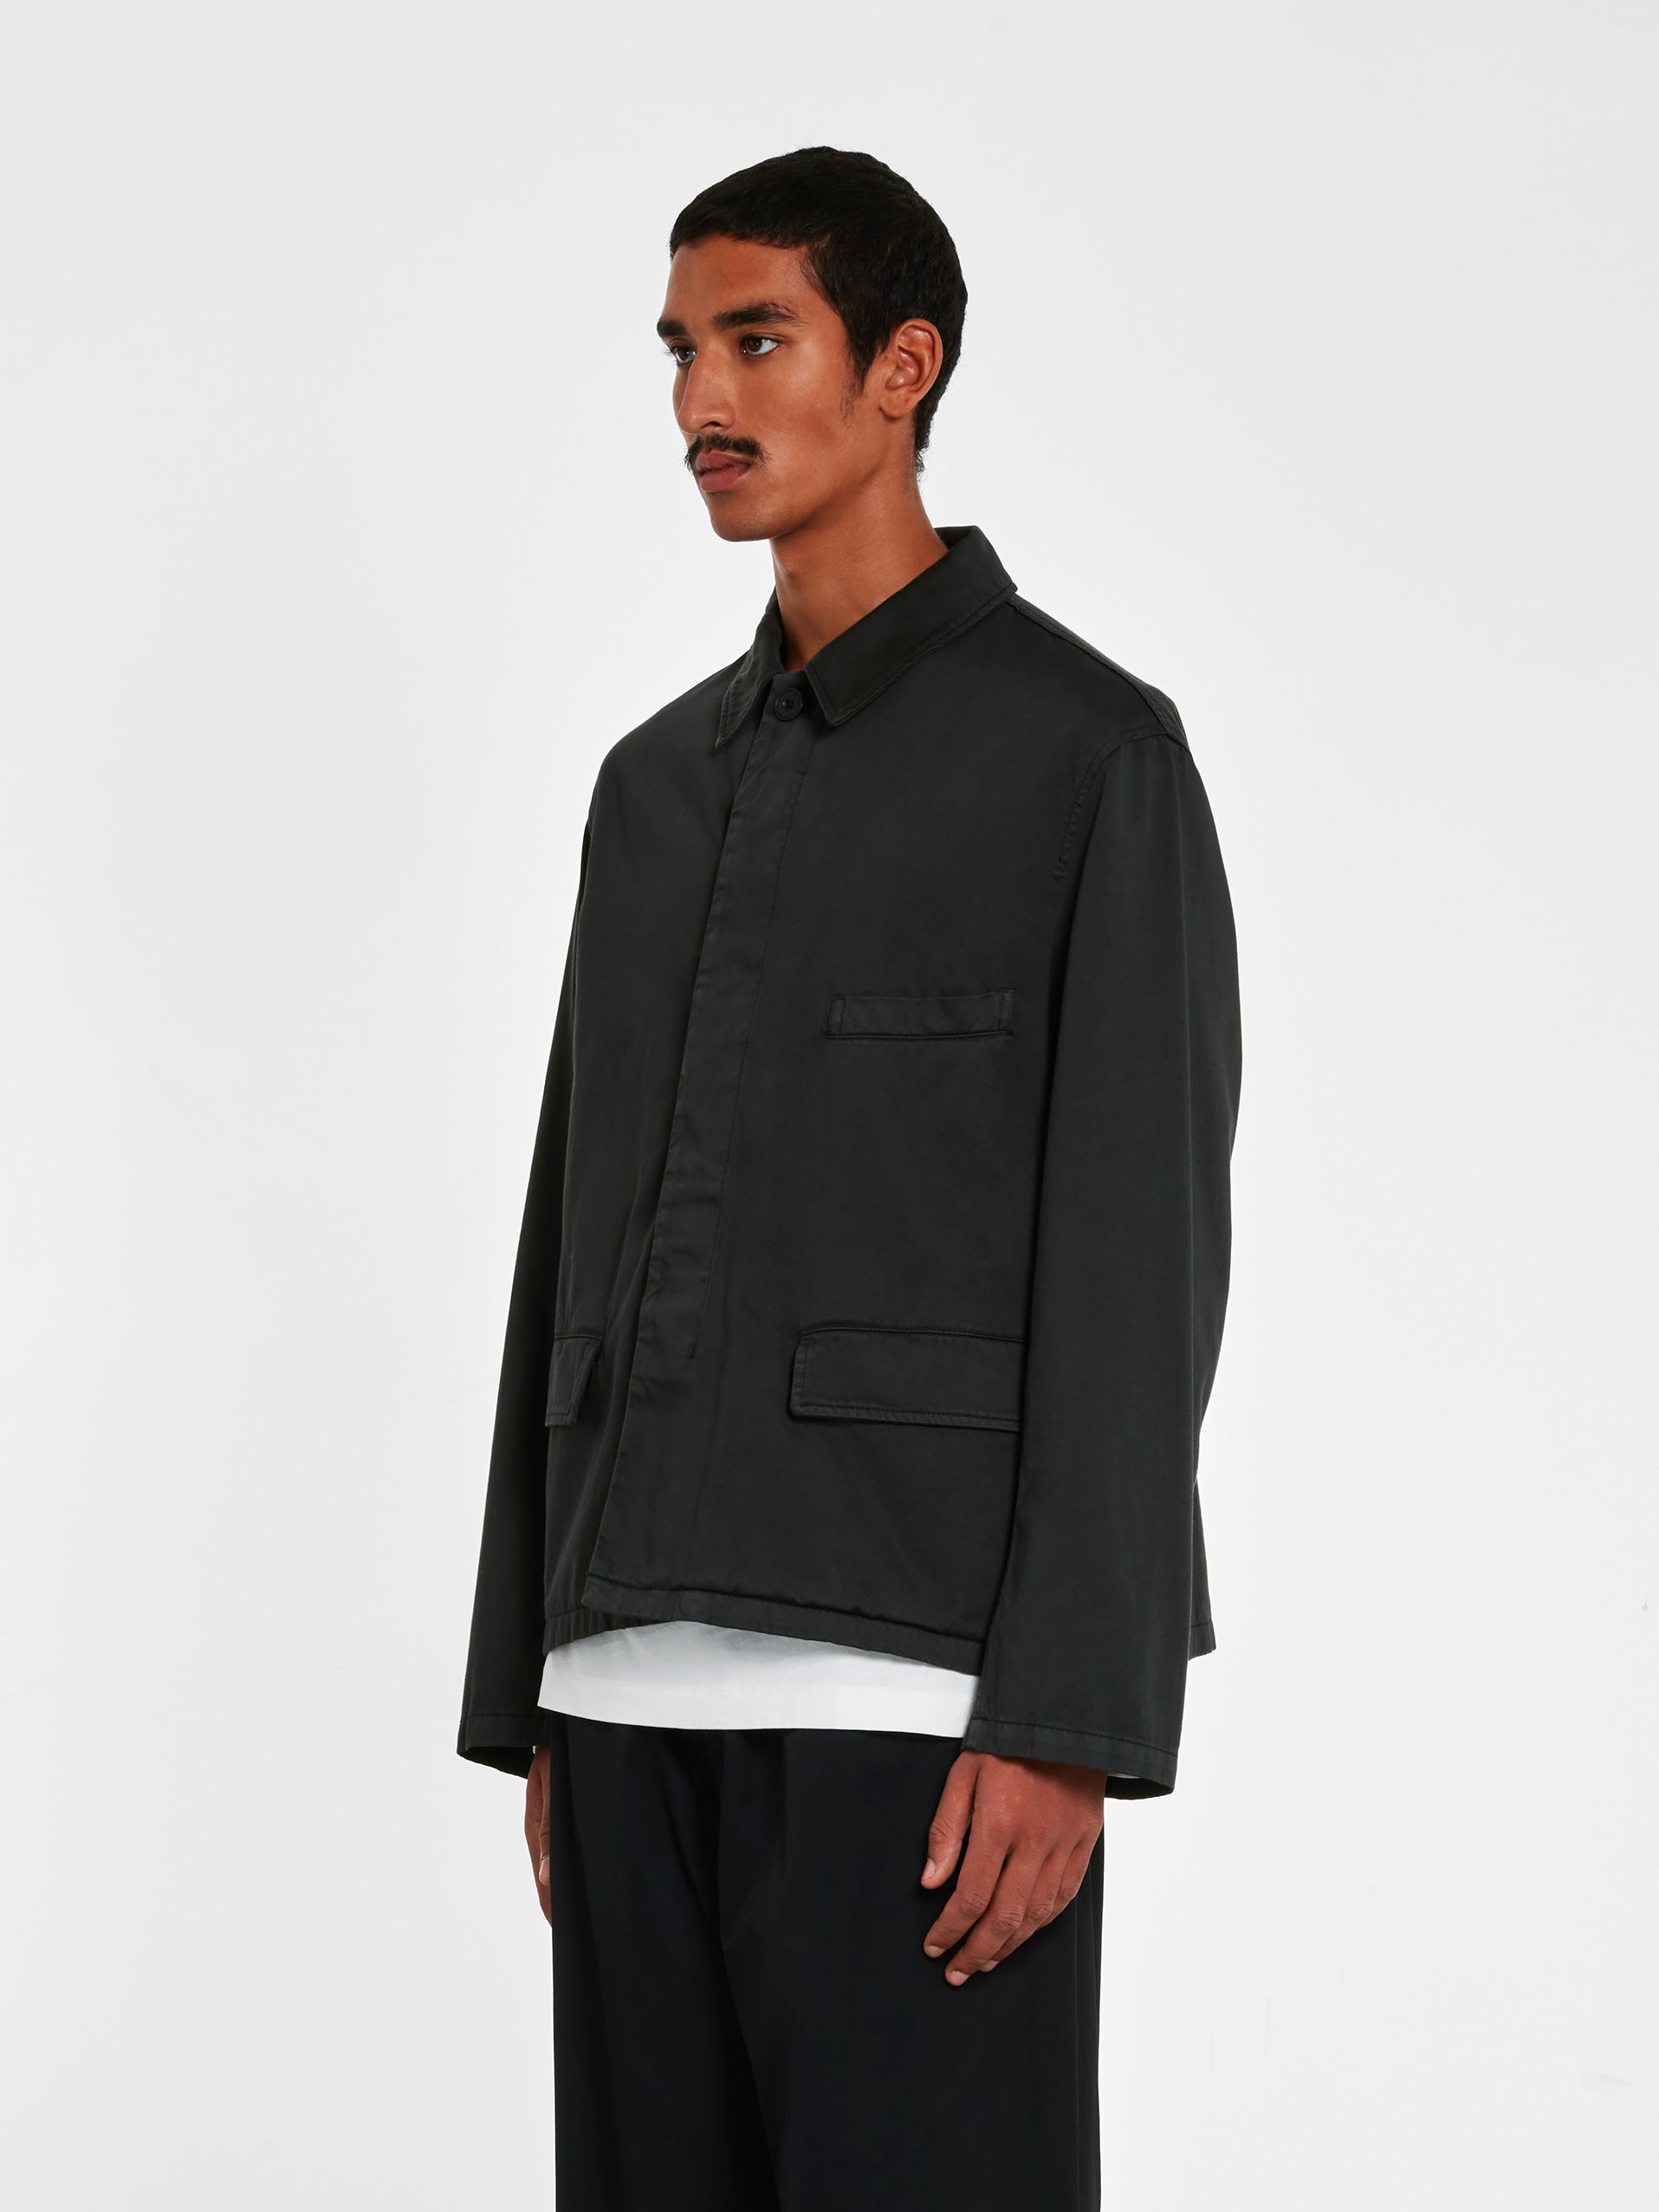 Lemaire - Men’s Workwear Jacket - (Green) view 2